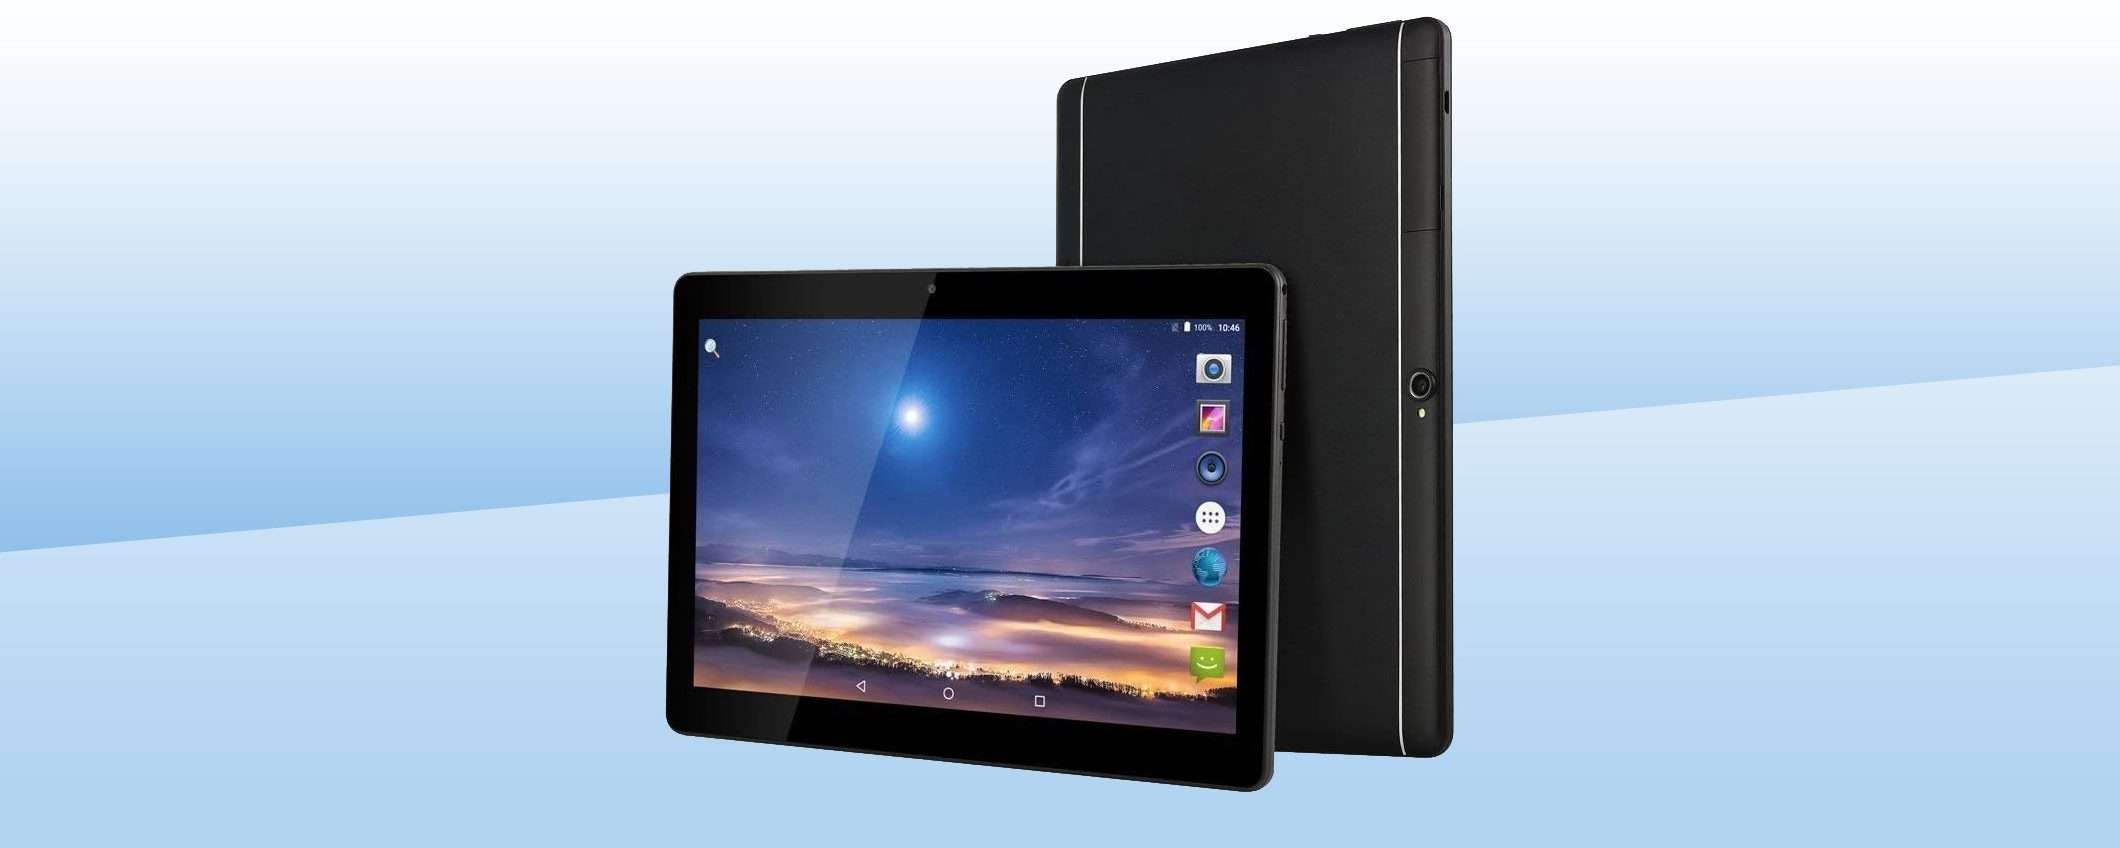 Tablet Android a 42 euro: OFFERTA LAMPO su